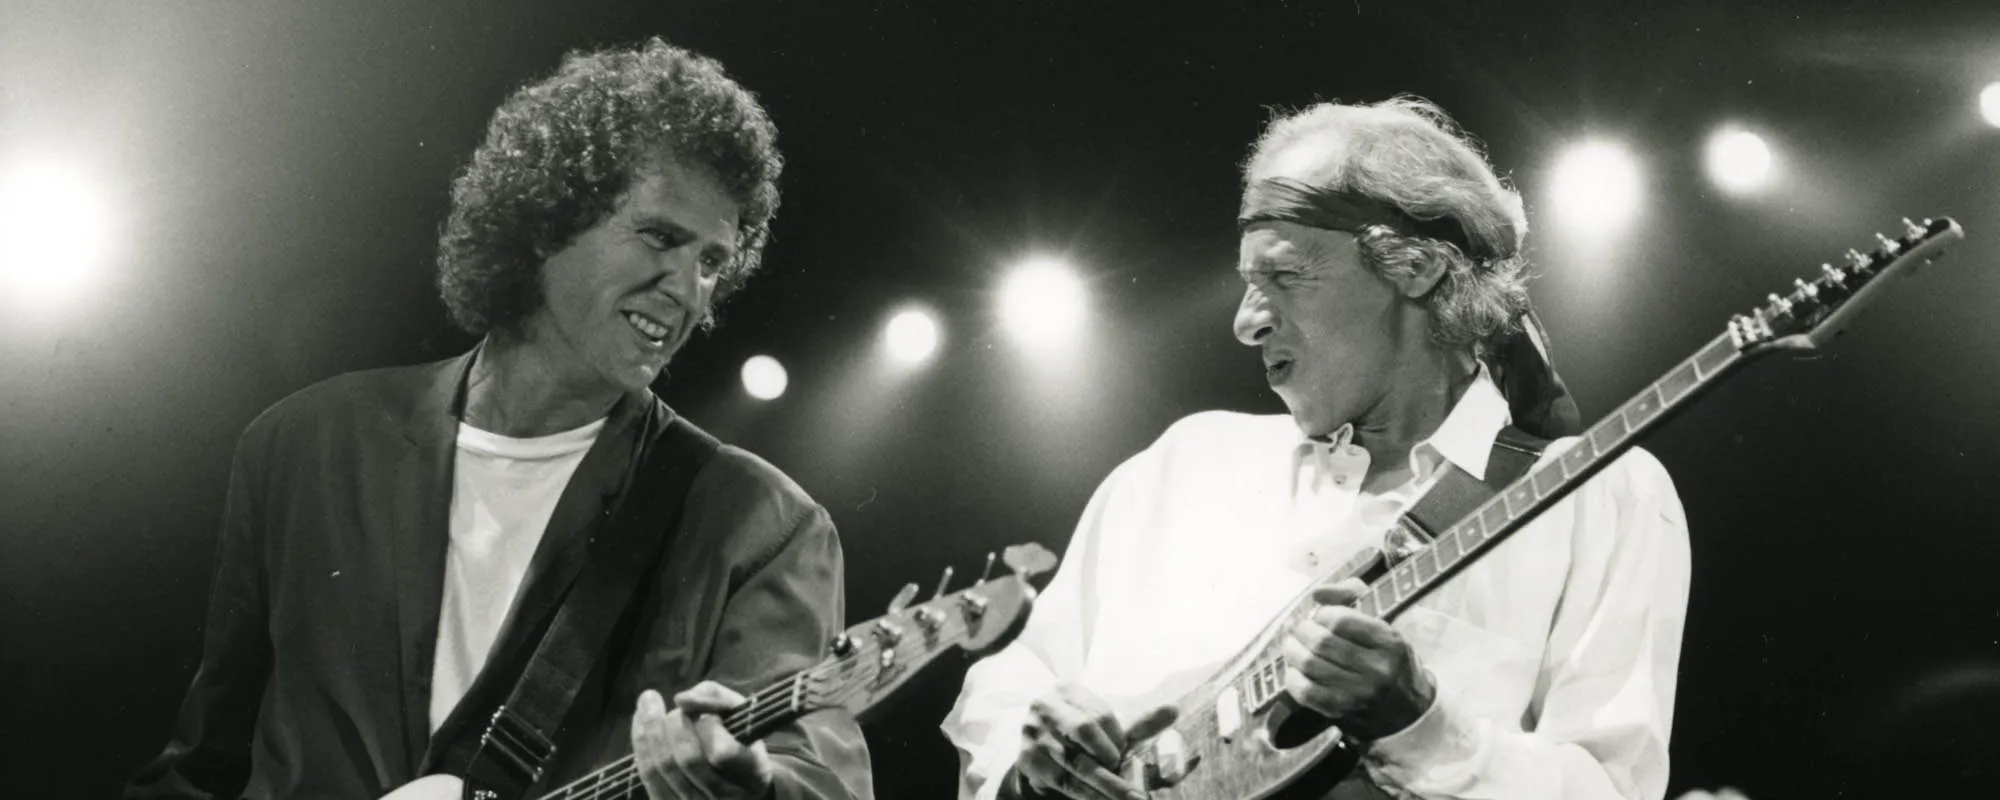 4 Songs You Didn’t Know Dire Straits’ Mark Knopfler Wrote